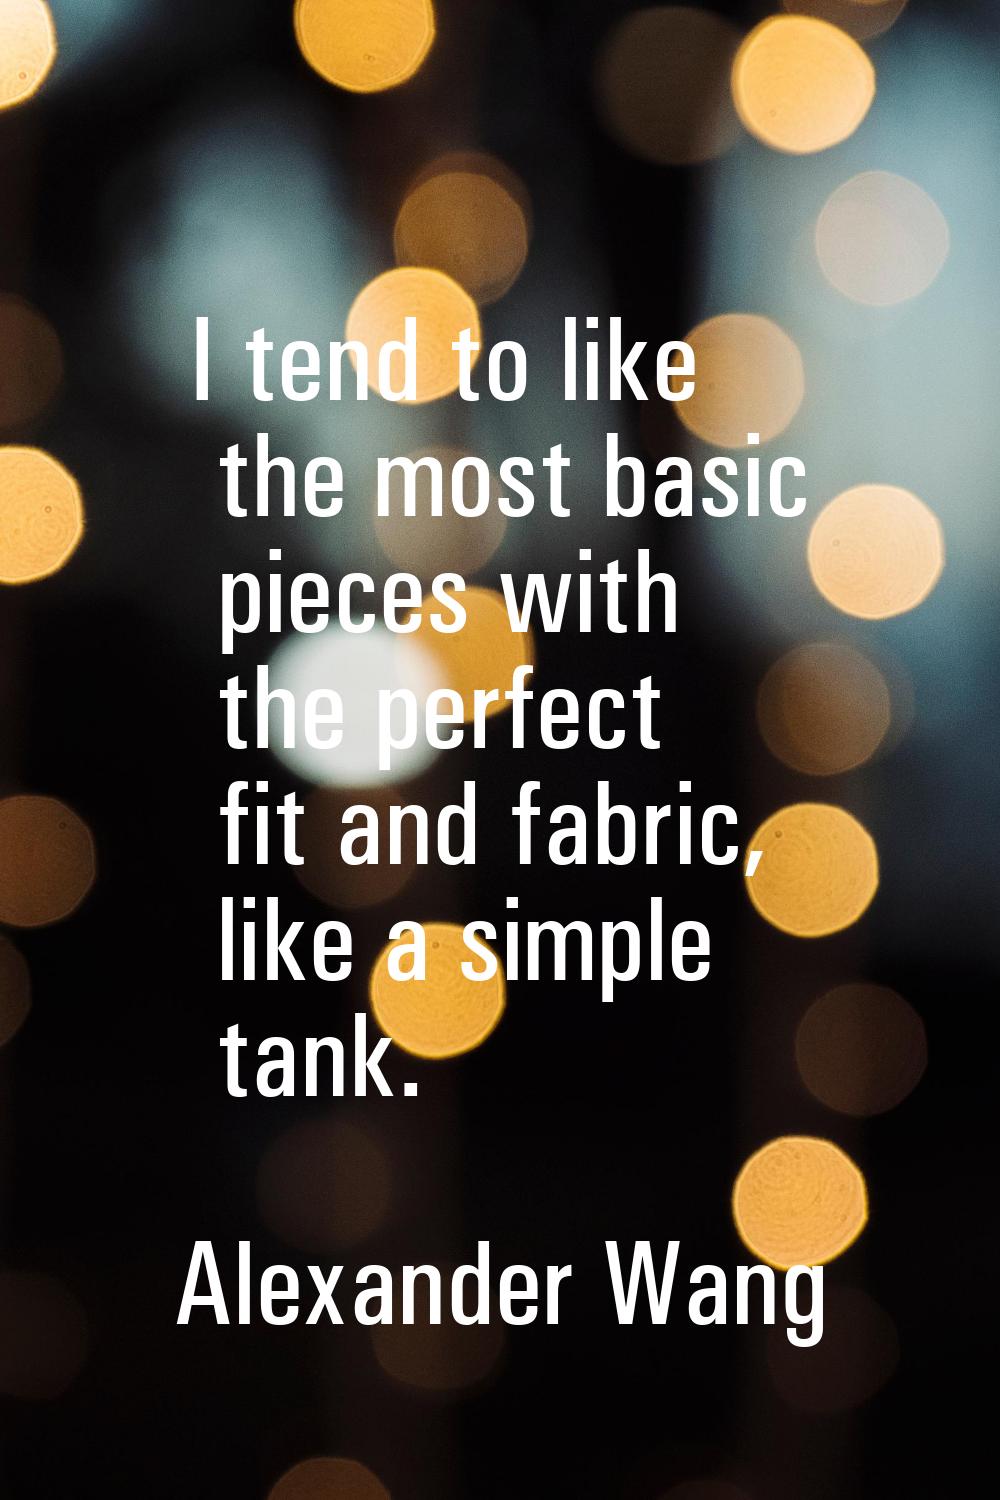 I tend to like the most basic pieces with the perfect fit and fabric, like a simple tank.